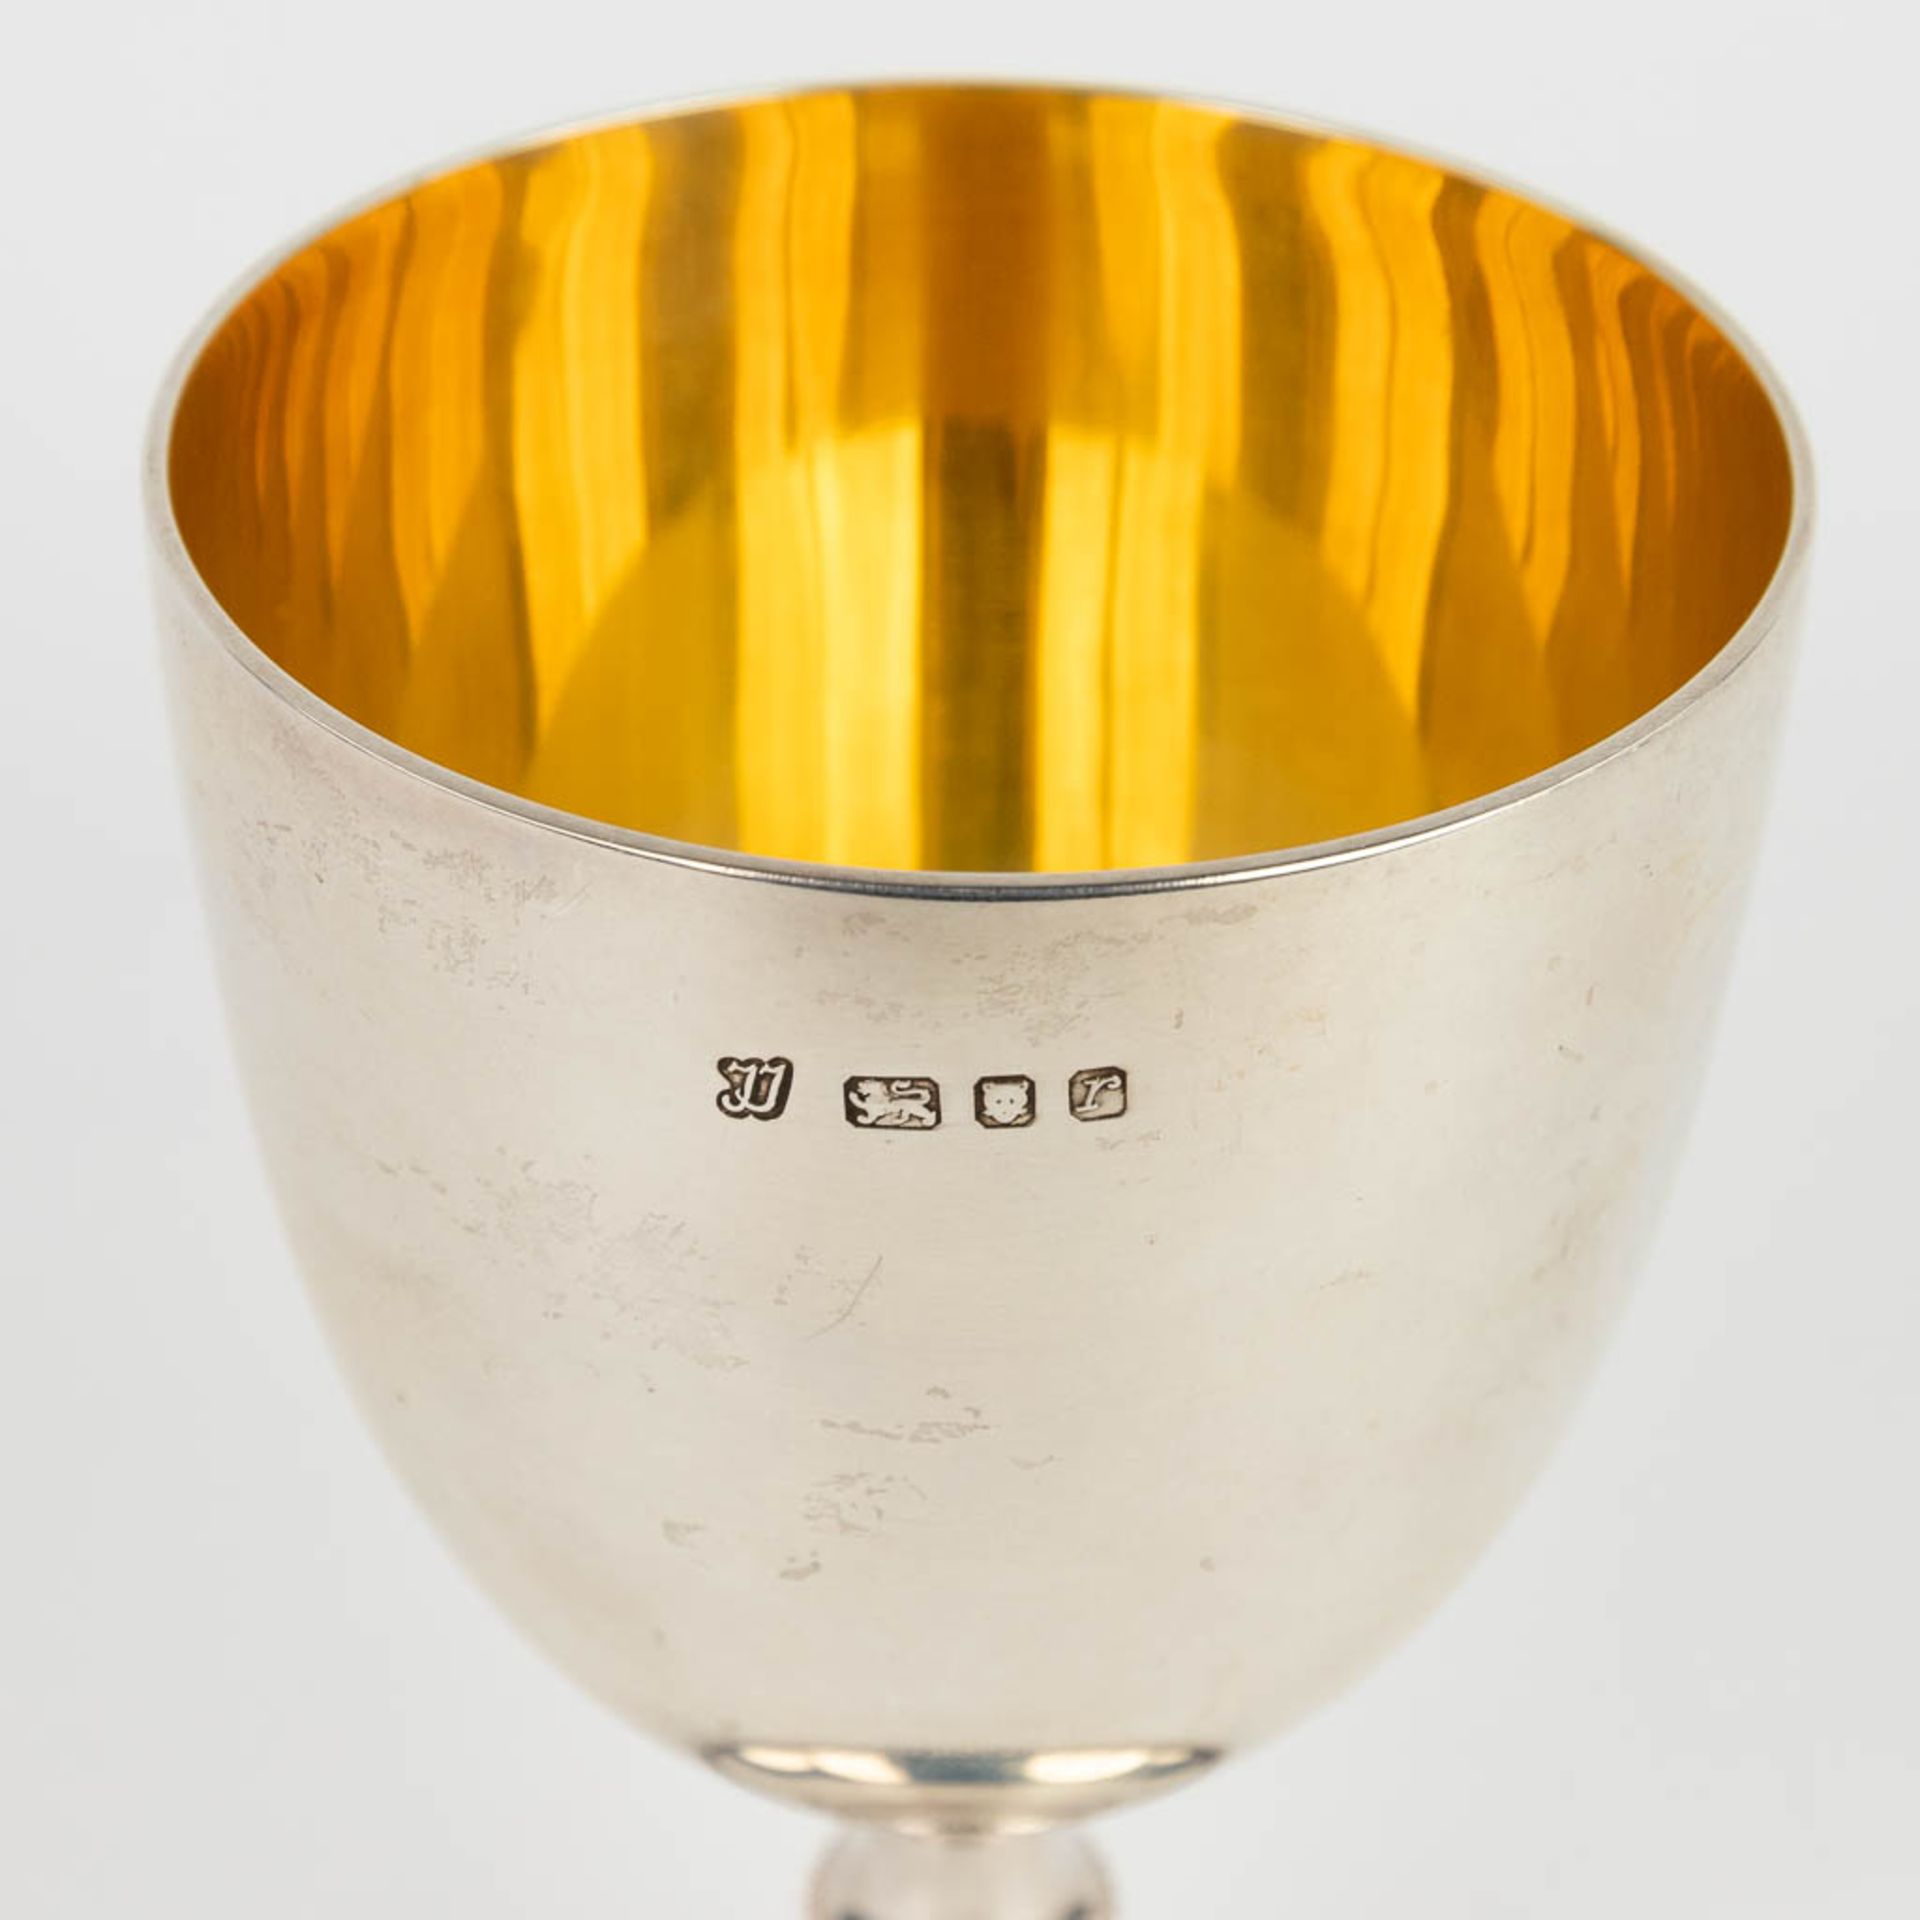 A set of 6 silver goblets, made by Trevor Towner in England, 1972. 1097g. (H: 14,5 x D: 7,5 cm) - Bild 7 aus 7